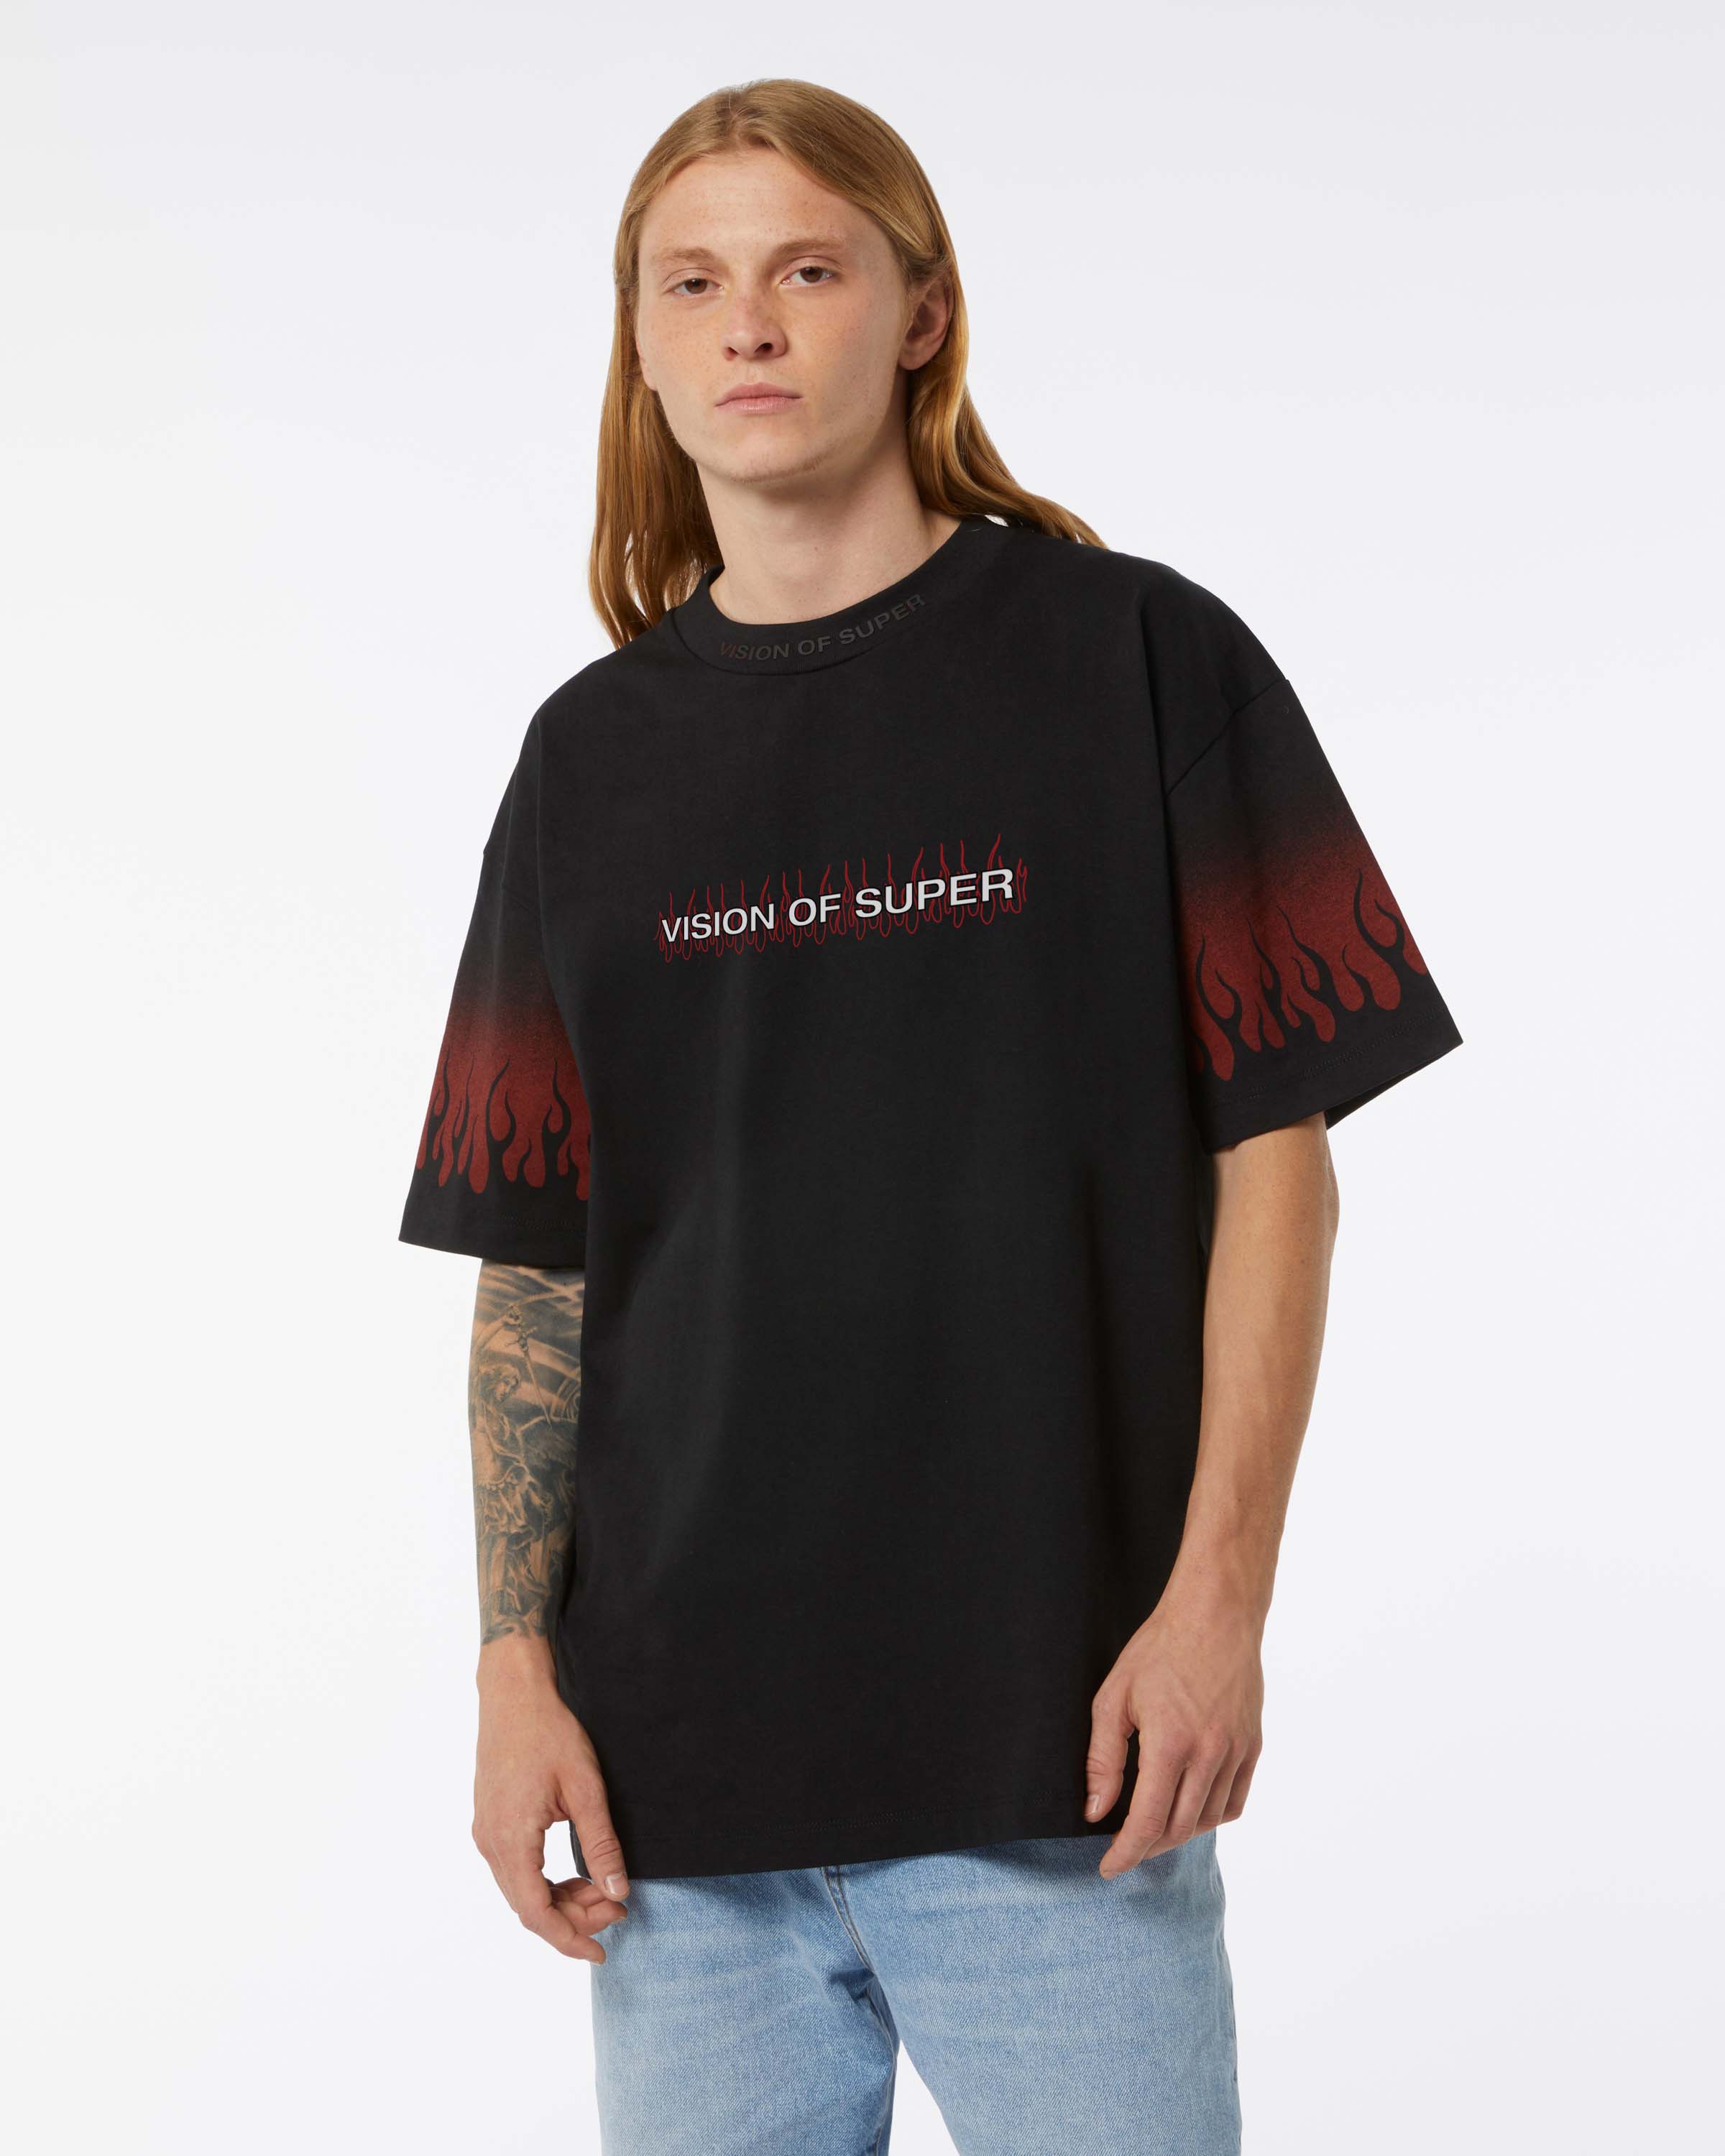 Logo t-shirt with negative red flames